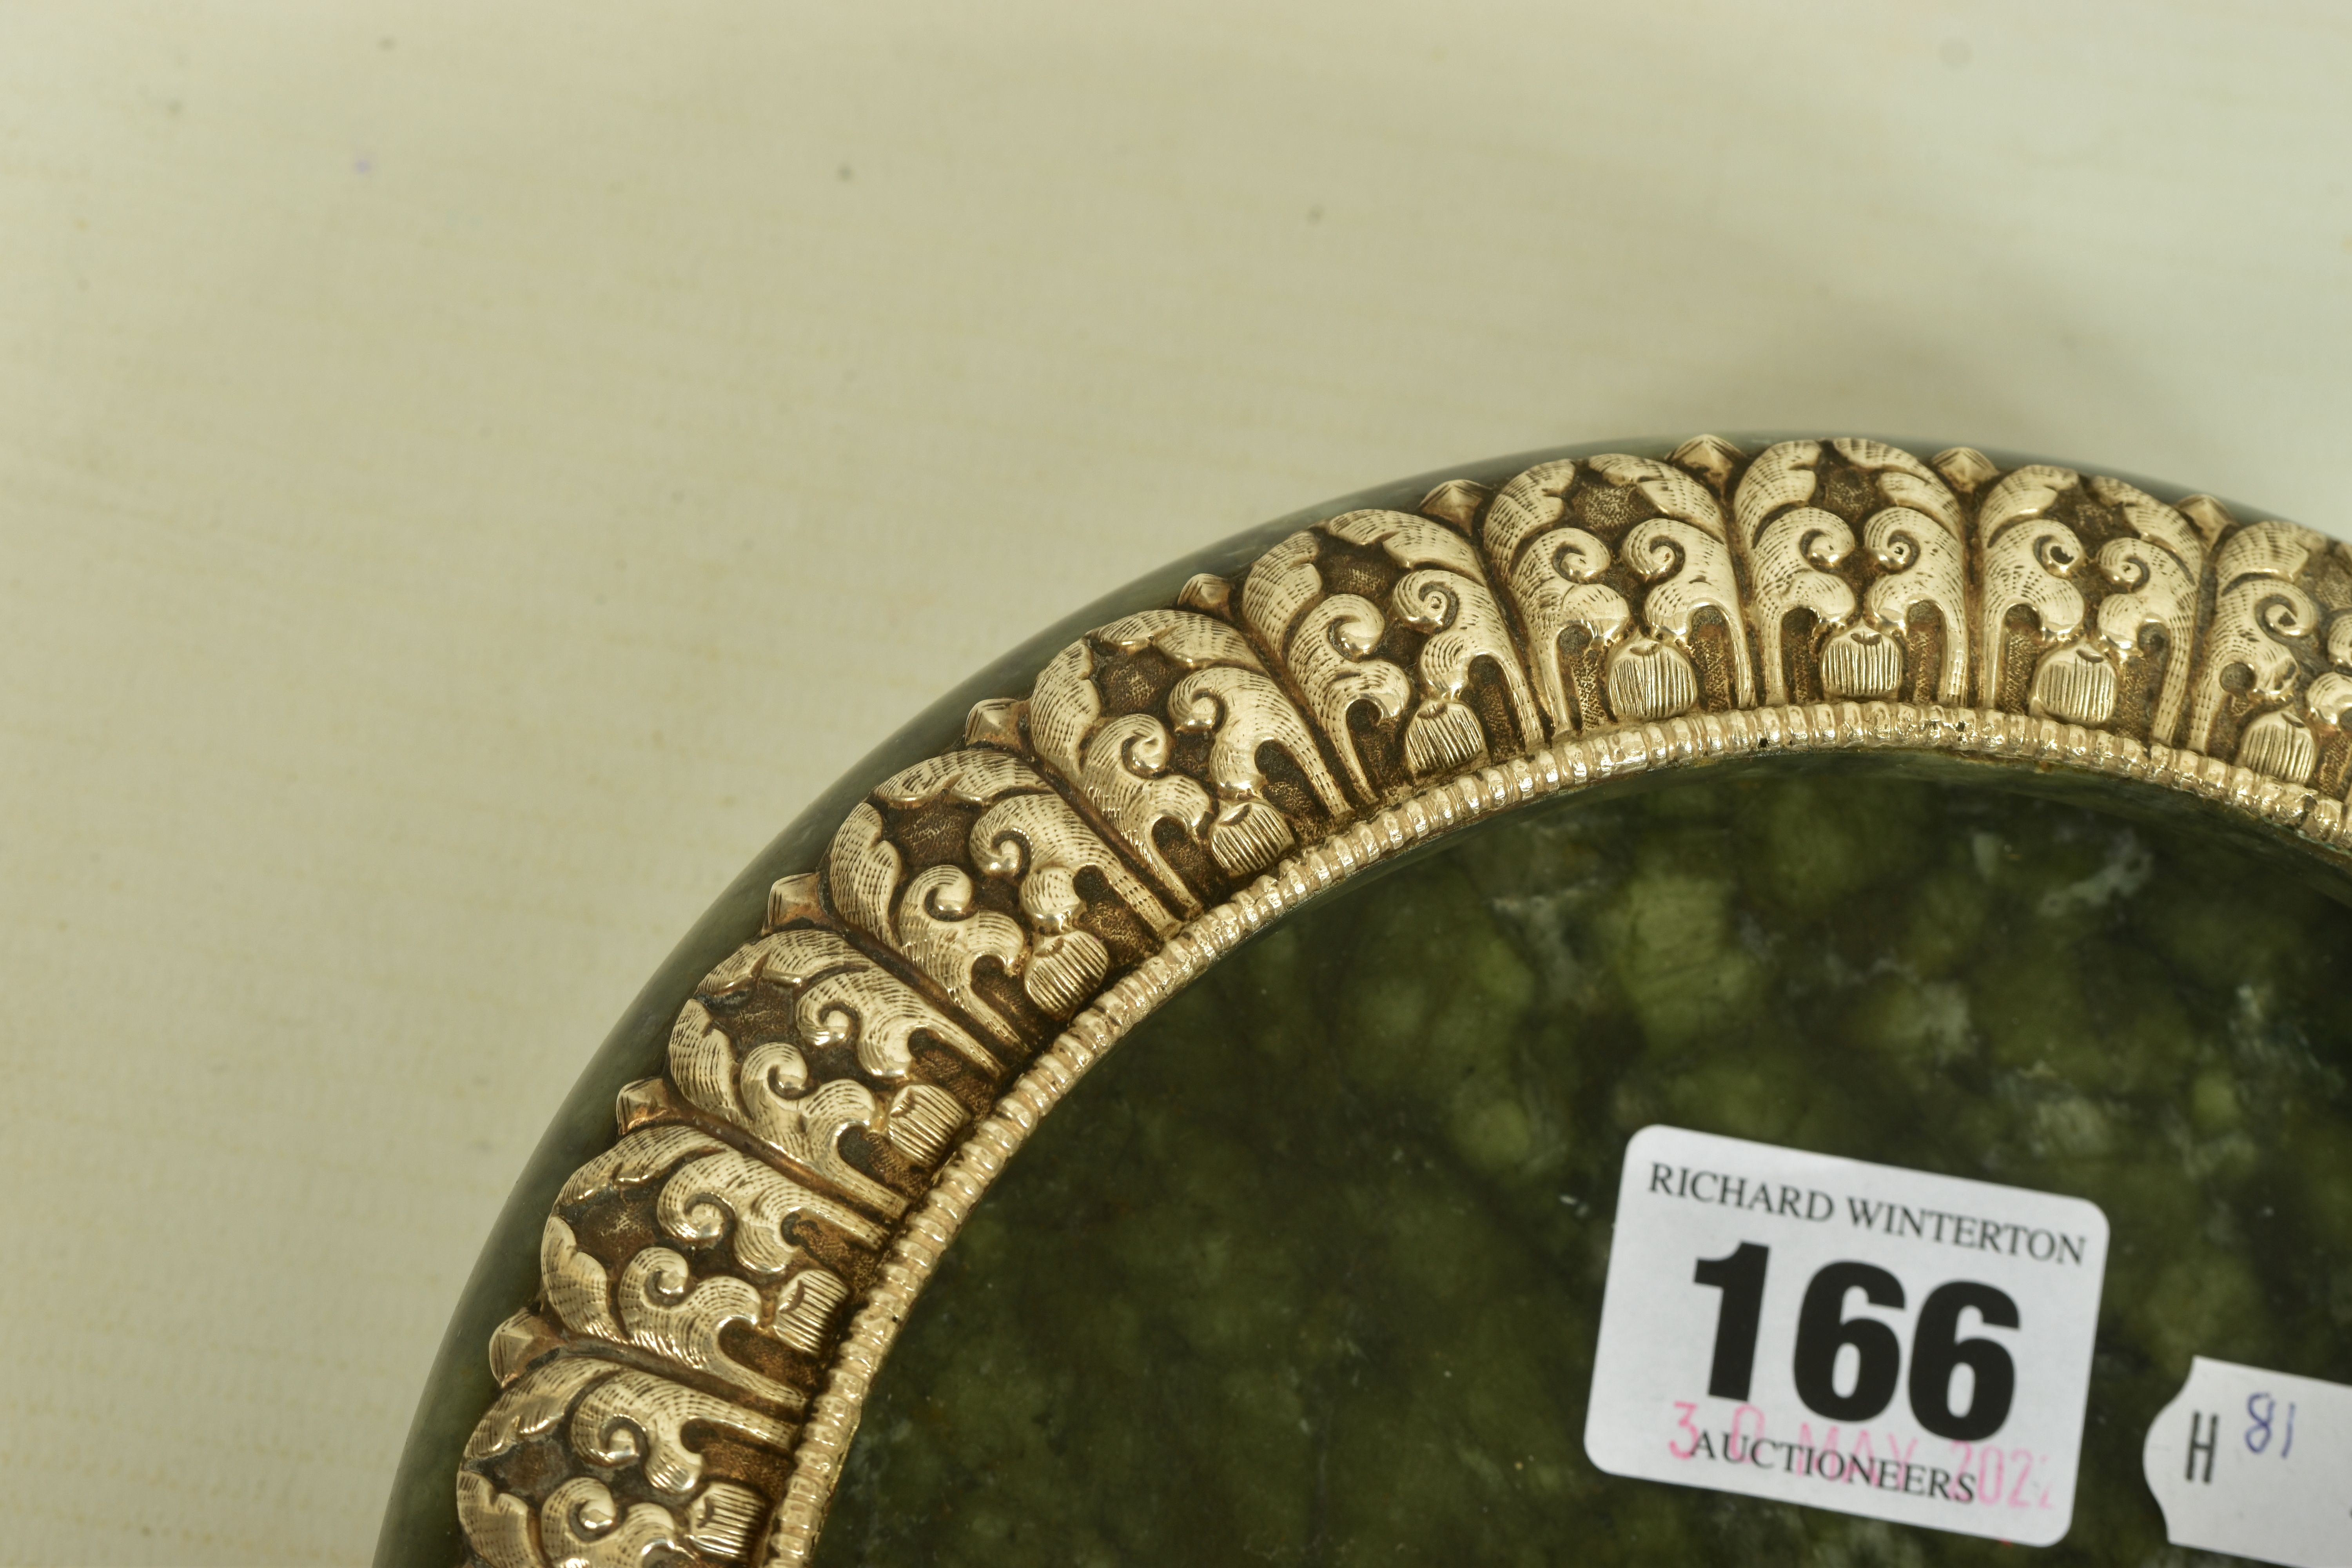 A WHITE METAL JADE BOWL AND STAND, believed to be 'Serpentine Jade,' with a white metal decorative - Image 2 of 6